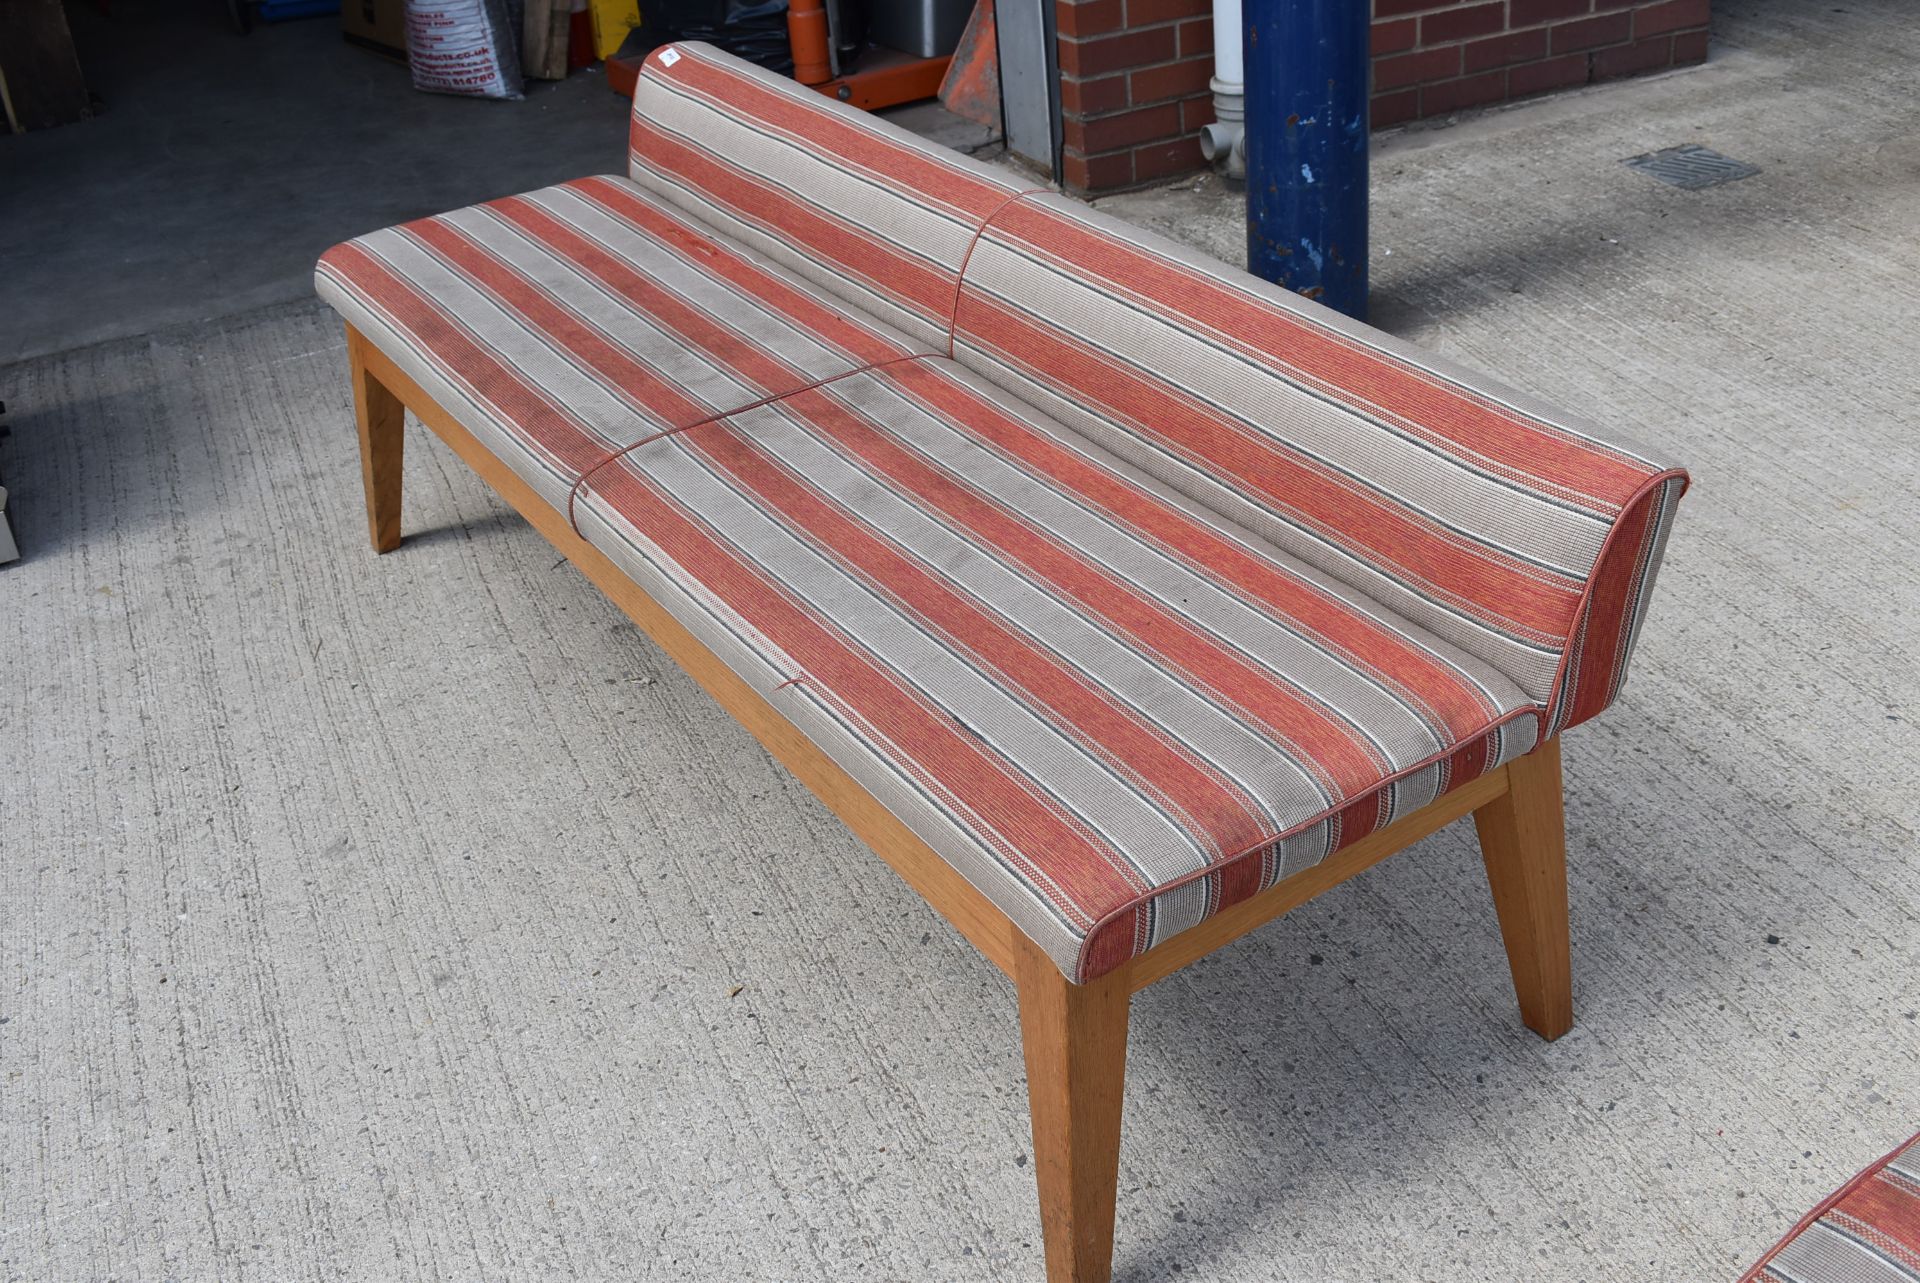 1 x Seating Bench With Solid Wood Bases and Hard Wearing Fabric Seats - Dimensions: H x W x D - Image 6 of 7